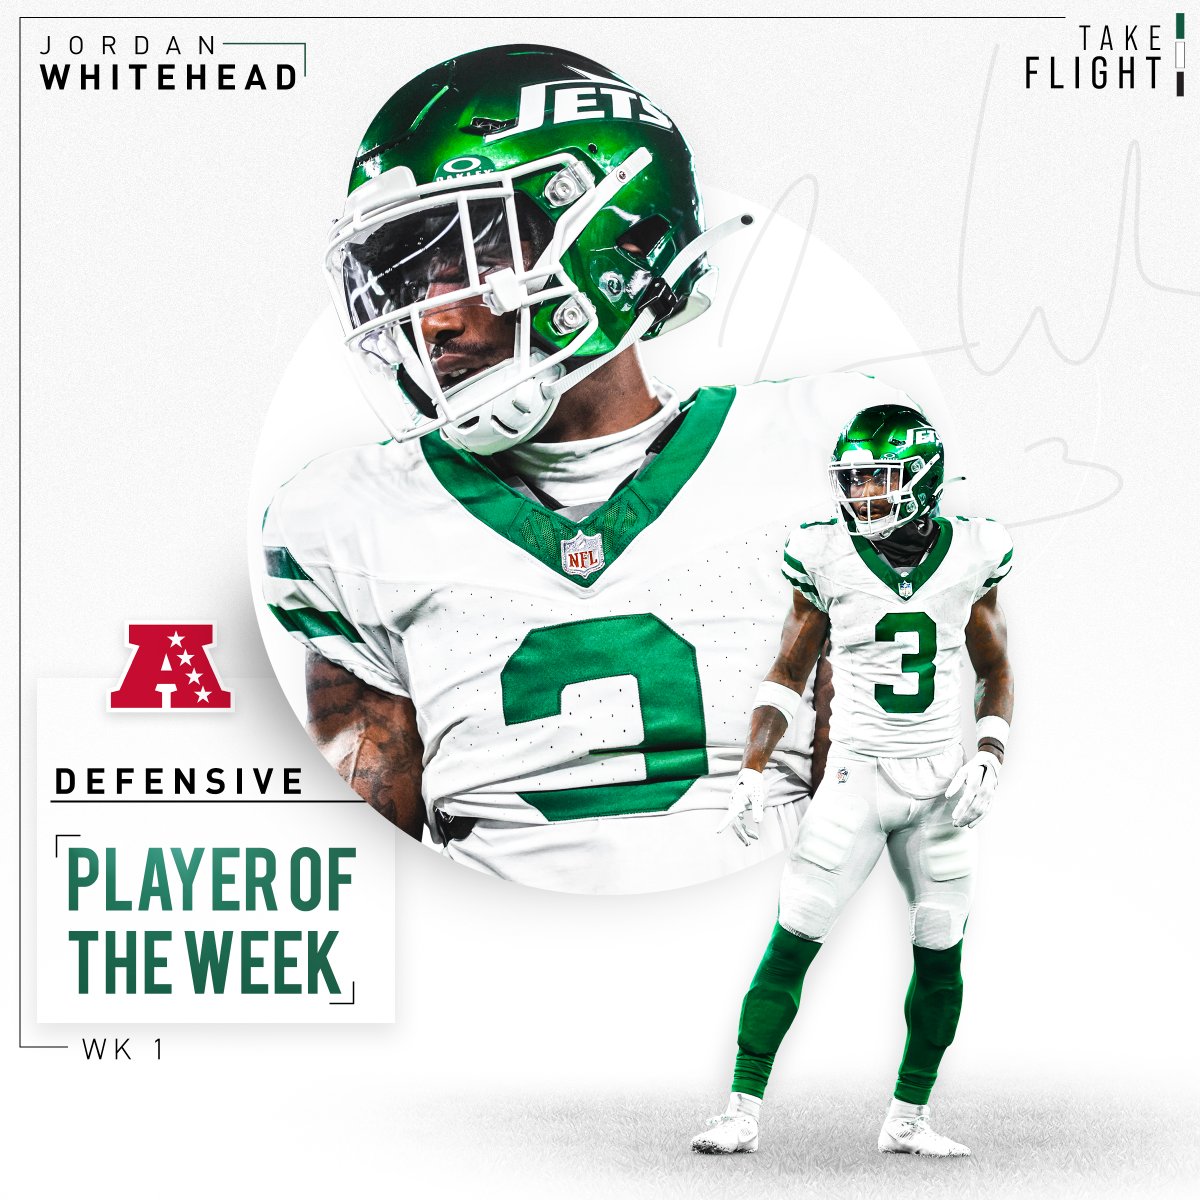 A hat trick of picks means you gotta get an award. Let's go, @jwhite_333!! 📰 nyj.social/3EAOogu